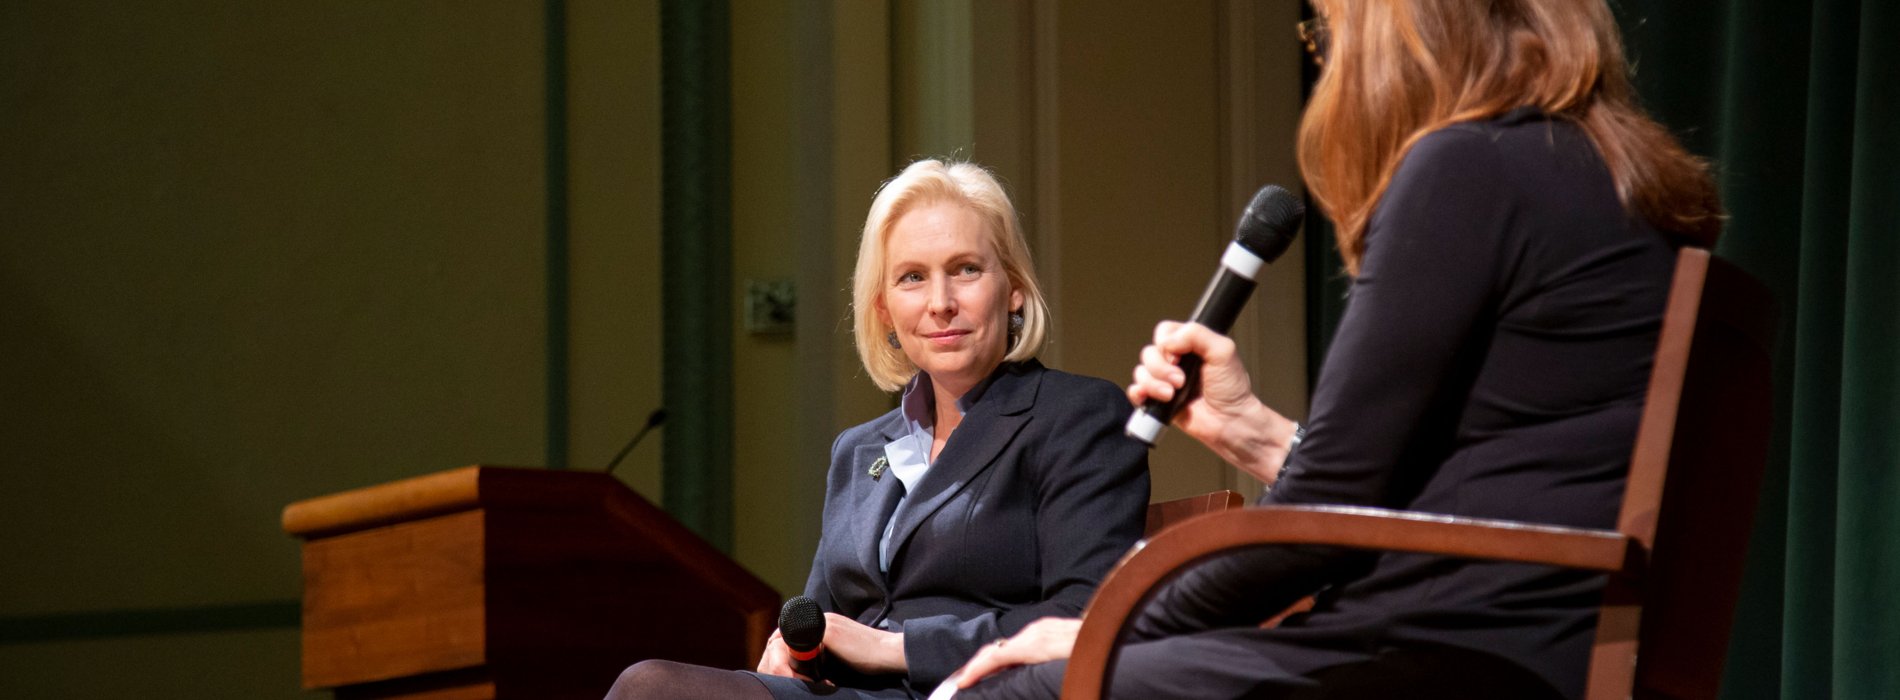 U.S. Senator Kirsten E. Gillibrand sits on stage holding a microphone as she is interviewed by another woman.